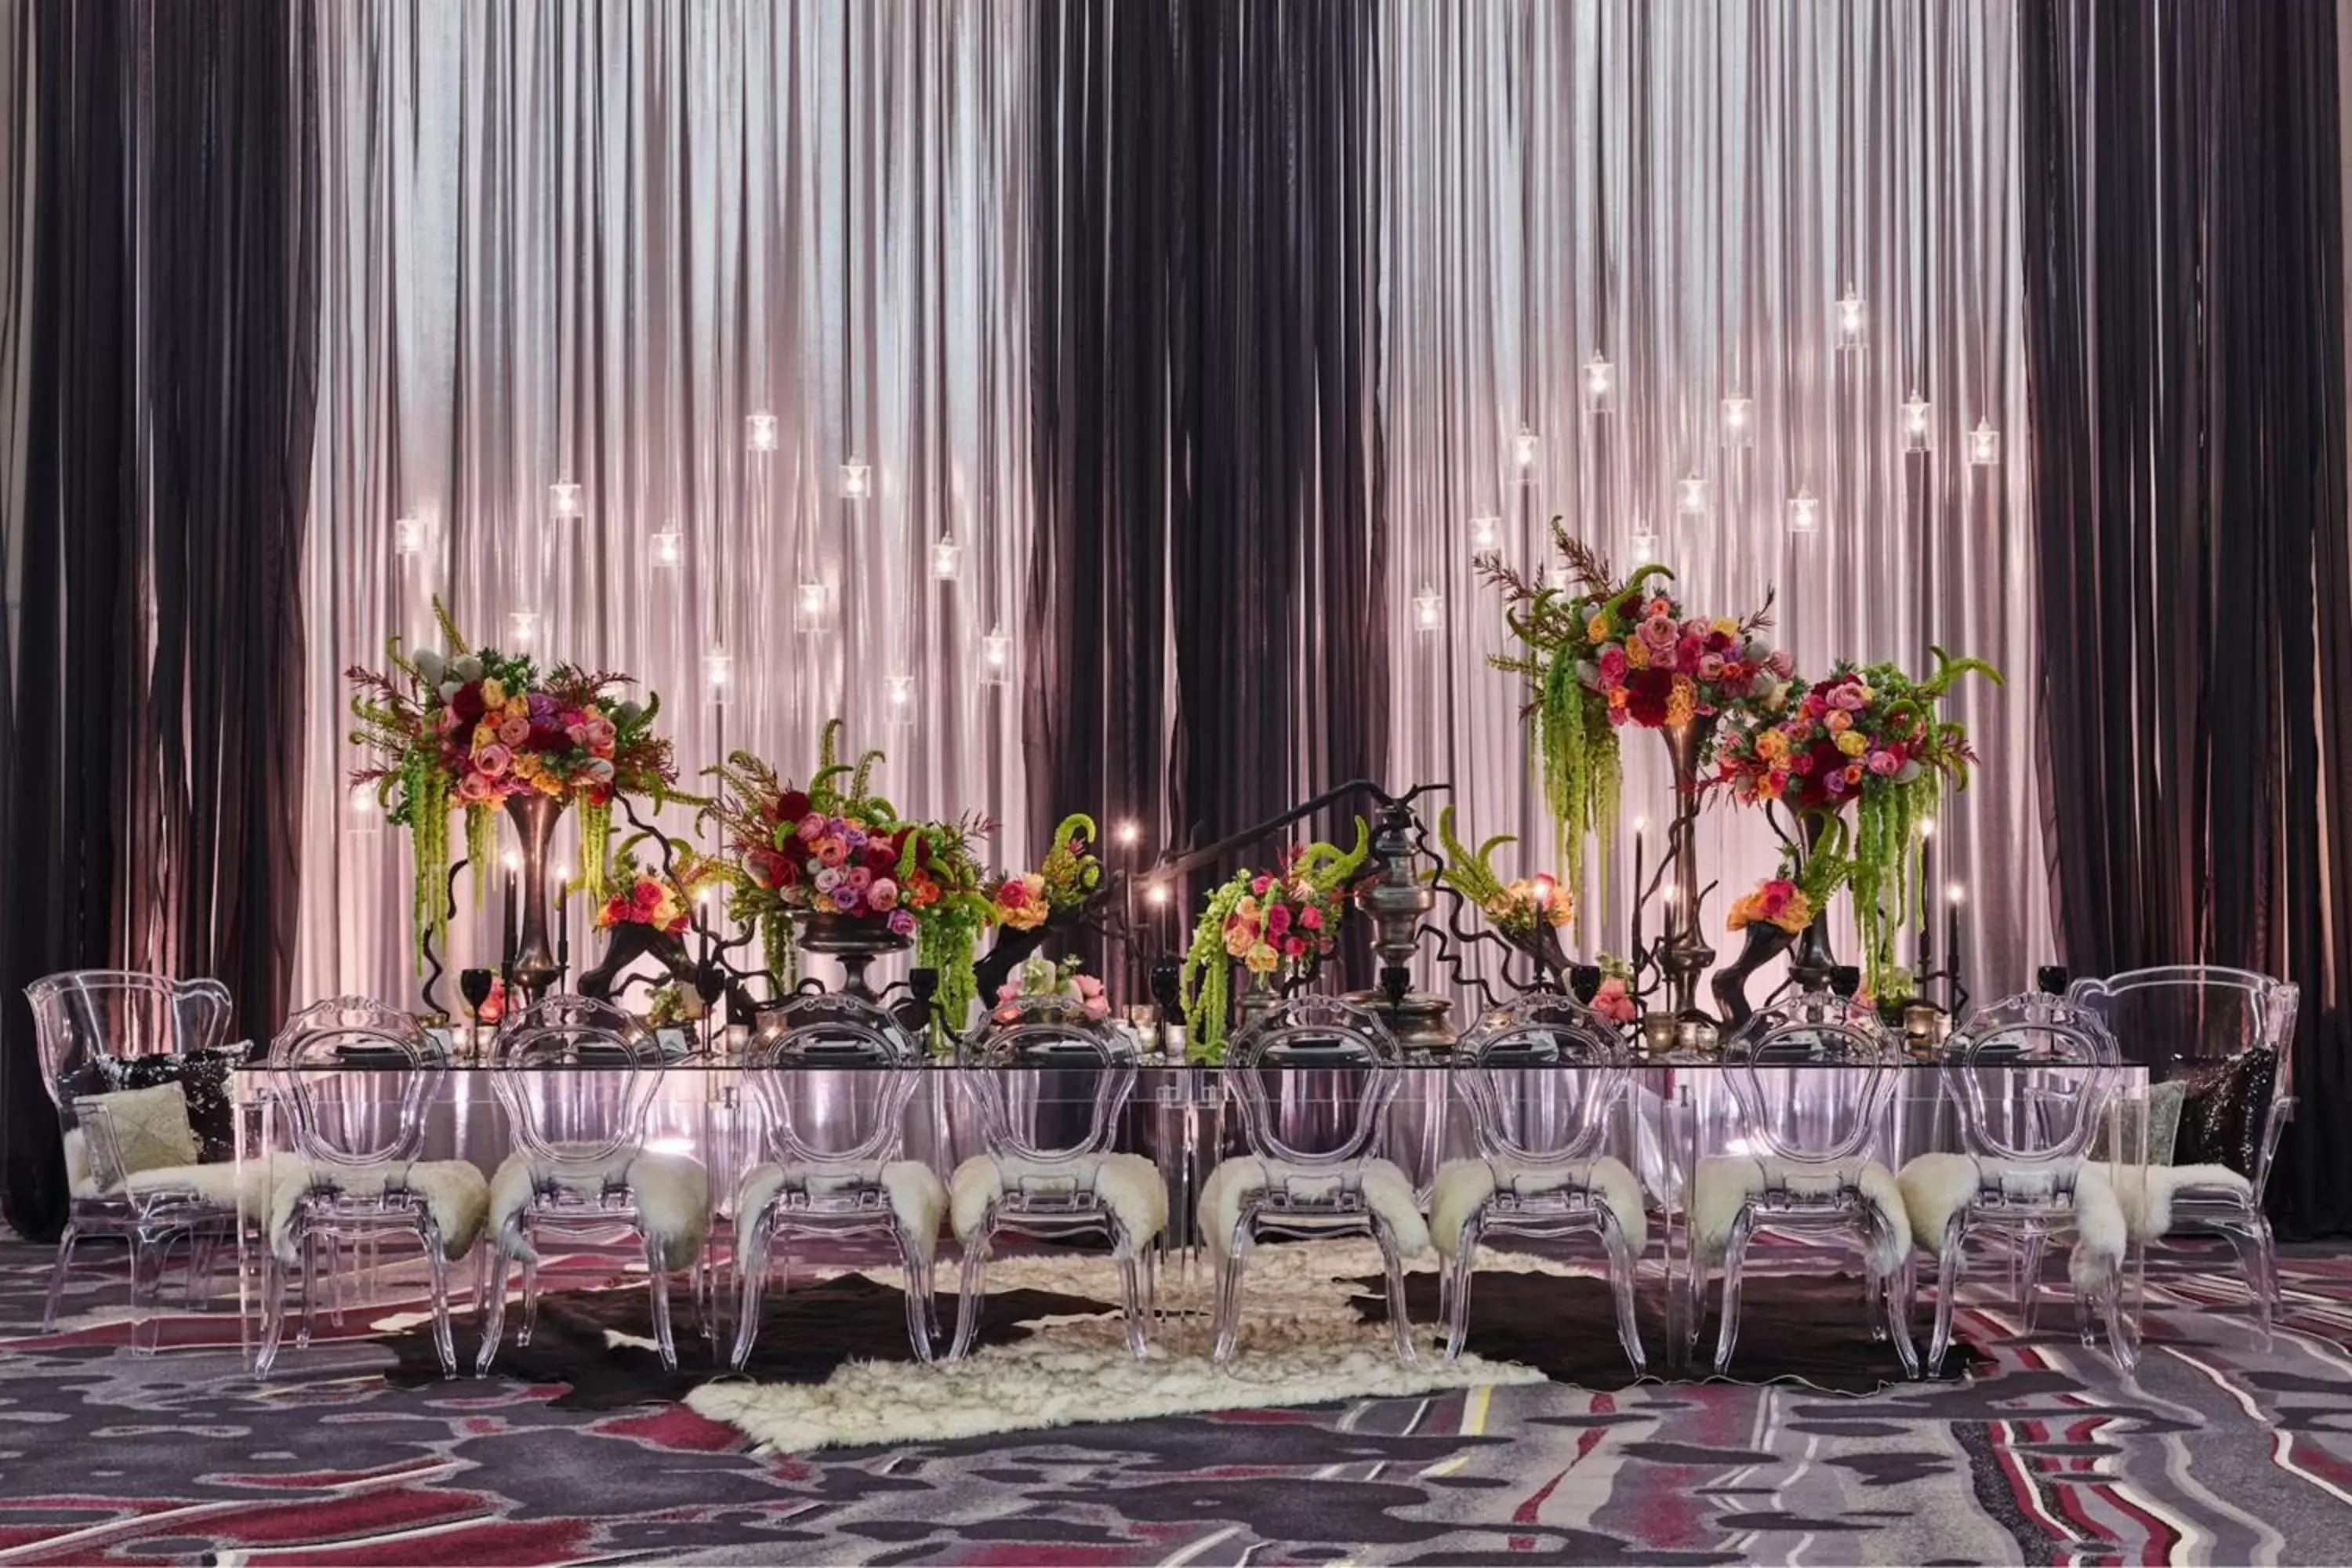 Banquet/Function facilities, Banquet Facilities in Art Ovation Hotel, Autograph Collection